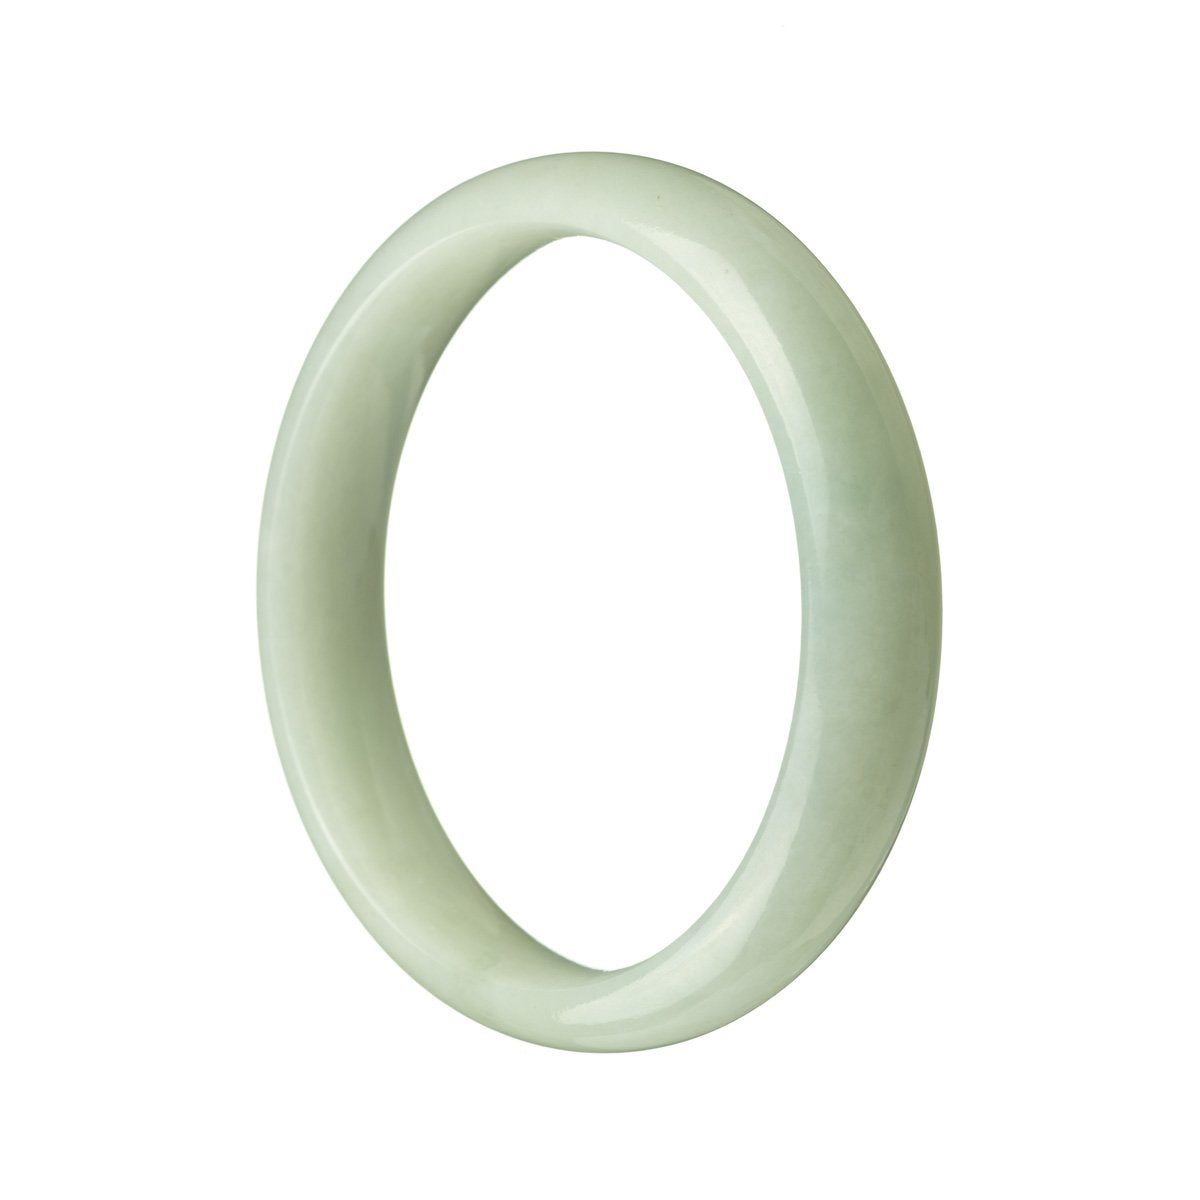 A pale green Burma jade bracelet with a genuine Grade A half moon design measuring 56mm. Exquisite craftsmanship by MAYS.